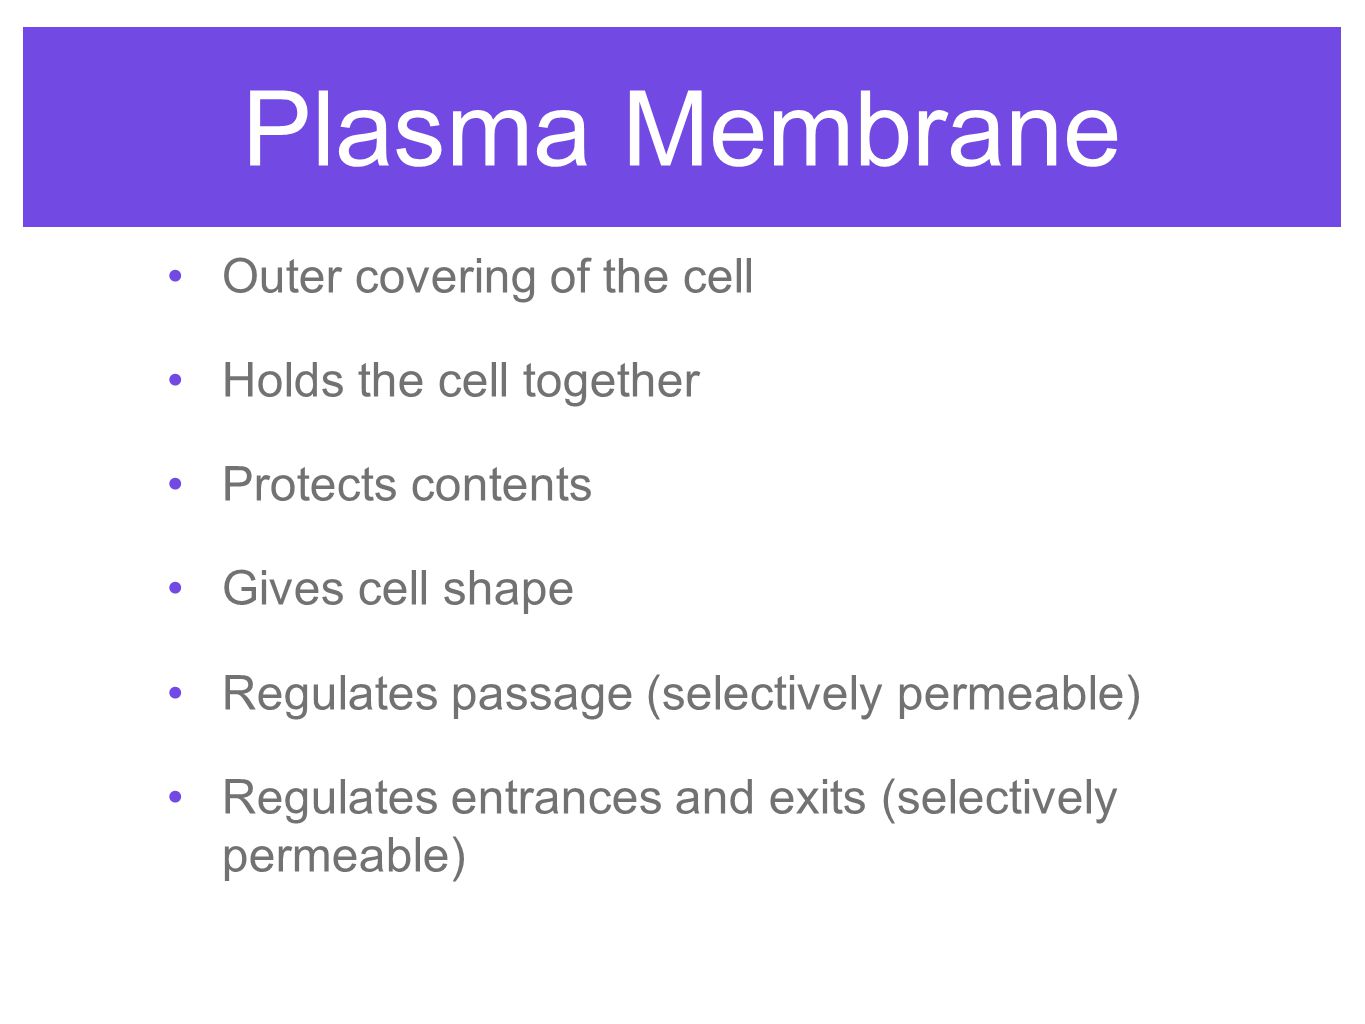 Plasma Membrane Outer covering of the cell Holds the cell together Protects contents Gives cell shape Regulates passage (selectively permeable) Regulates entrances and exits (selectively permeable)